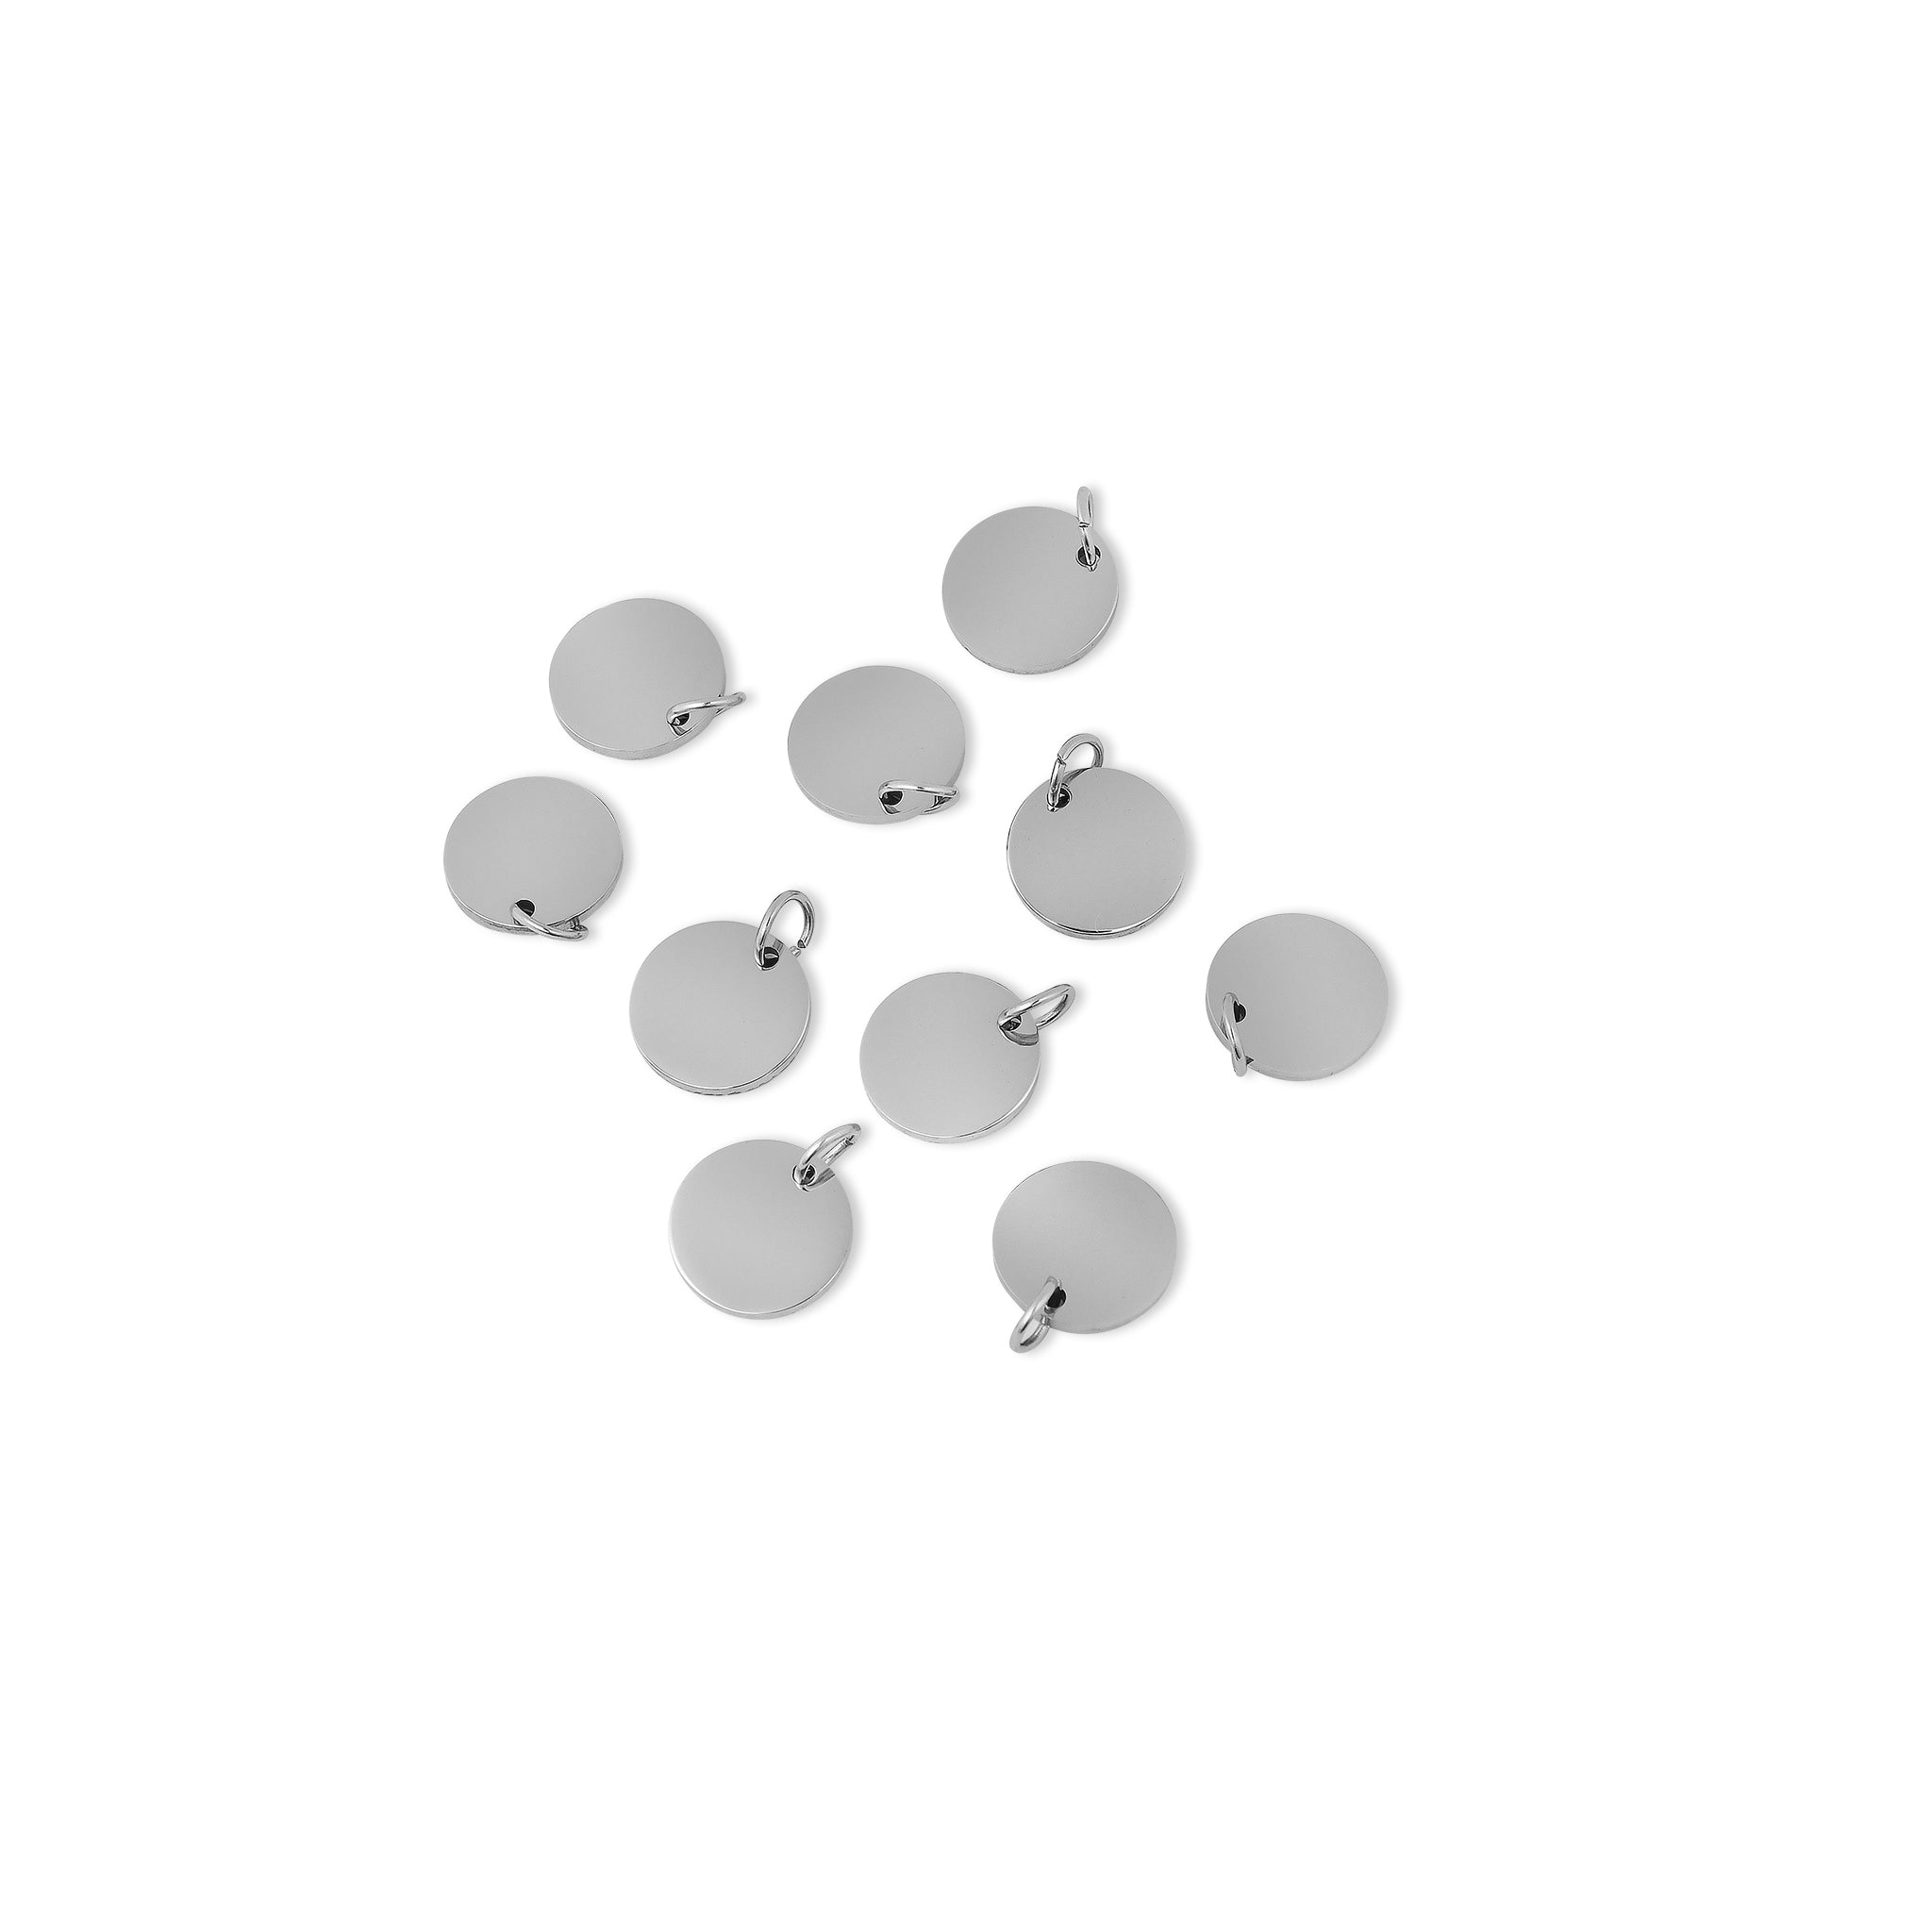 10 Pack - 13mm Blank Round Polished Stainless Steel Pendant / SBB0013